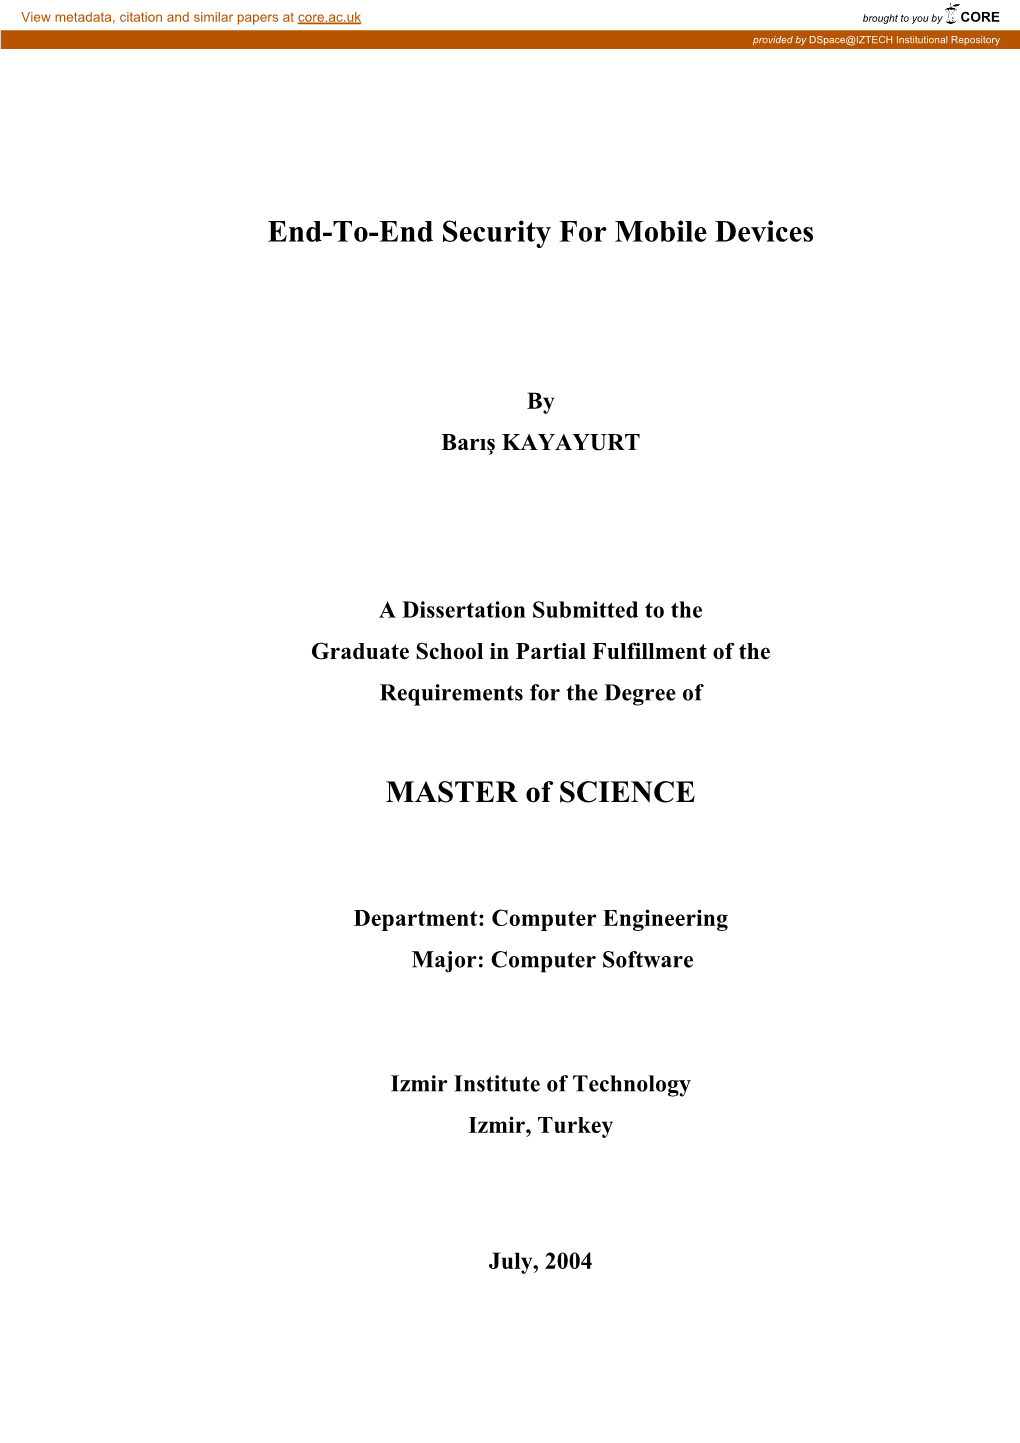 End-To-End Security for Mobile Devices MASTER of SCIENCE